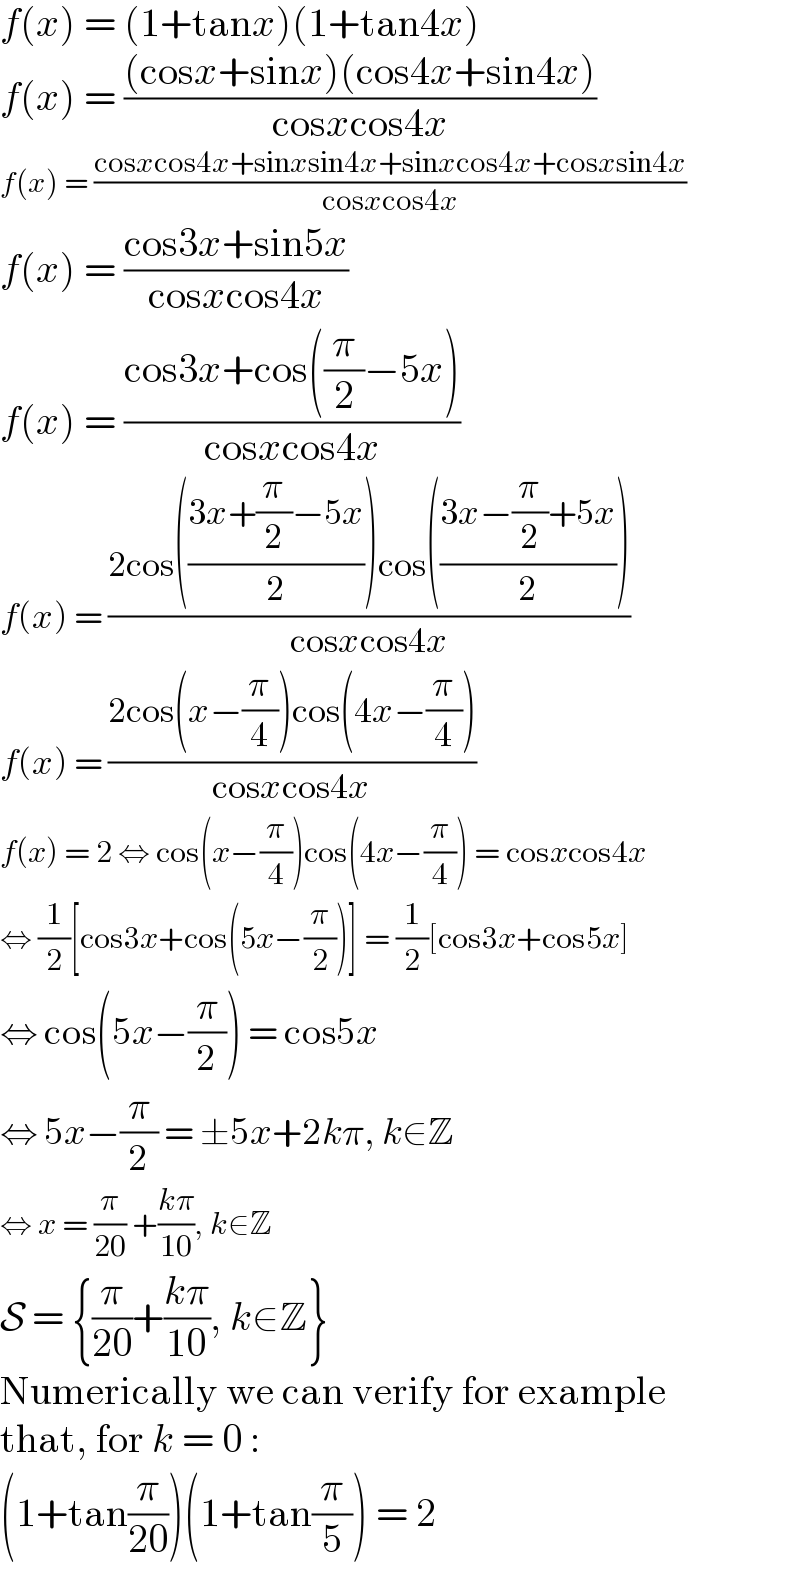 f(x) = (1+tanx)(1+tan4x)  f(x) = (((cosx+sinx)(cos4x+sin4x))/(cosxcos4x))  f(x) = ((cosxcos4x+sinxsin4x+sinxcos4x+cosxsin4x)/(cosxcos4x))  f(x) = ((cos3x+sin5x)/(cosxcos4x))  f(x) = ((cos3x+cos((π/2)−5x))/(cosxcos4x))  f(x) = ((2cos(((3x+(π/2)−5x)/2))cos(((3x−(π/2)+5x)/2)))/(cosxcos4x))  f(x) = ((2cos(x−(π/4))cos(4x−(π/4)))/(cosxcos4x))  f(x) = 2 ⇔ cos(x−(π/4))cos(4x−(π/4)) = cosxcos4x  ⇔ (1/2)[cos3x+cos(5x−(π/2))] = (1/2)[cos3x+cos5x]  ⇔ cos(5x−(π/2)) = cos5x  ⇔ 5x−(π/2) = ±5x+2kπ, k∈Z  ⇔ x = (π/(20)) +((kπ)/(10)), k∈Z  S = {(π/(20))+((kπ)/(10)), k∈Z}  Numerically we can verify for example  that, for k = 0 :  (1+tan(π/(20)))(1+tan(π/5)) = 2  